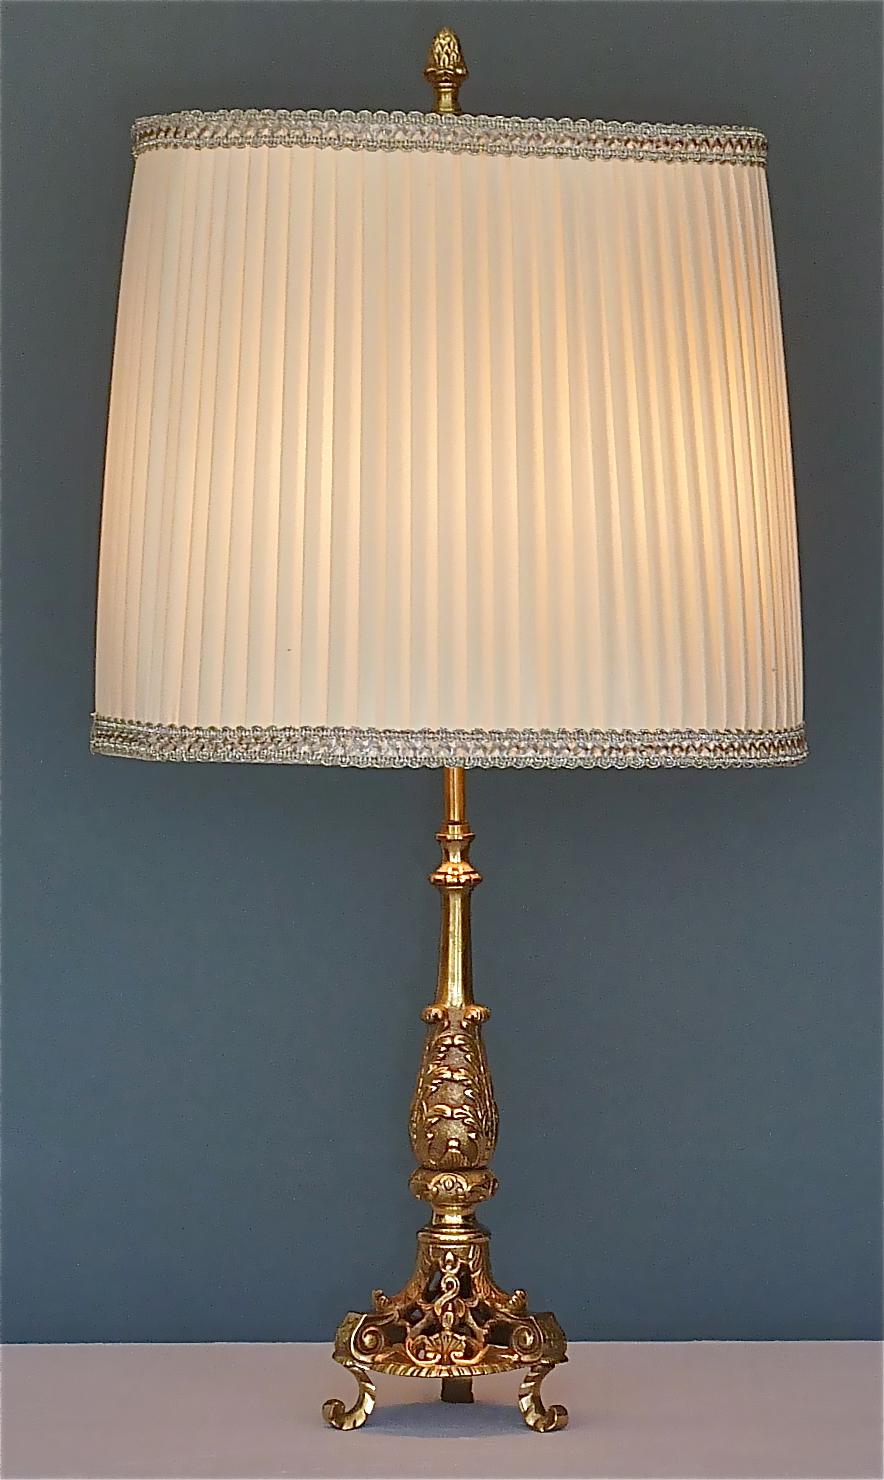 German Large Rococo Baroque Maison Jansen Style Floral Table Lamp Patinated Brass 1950s For Sale